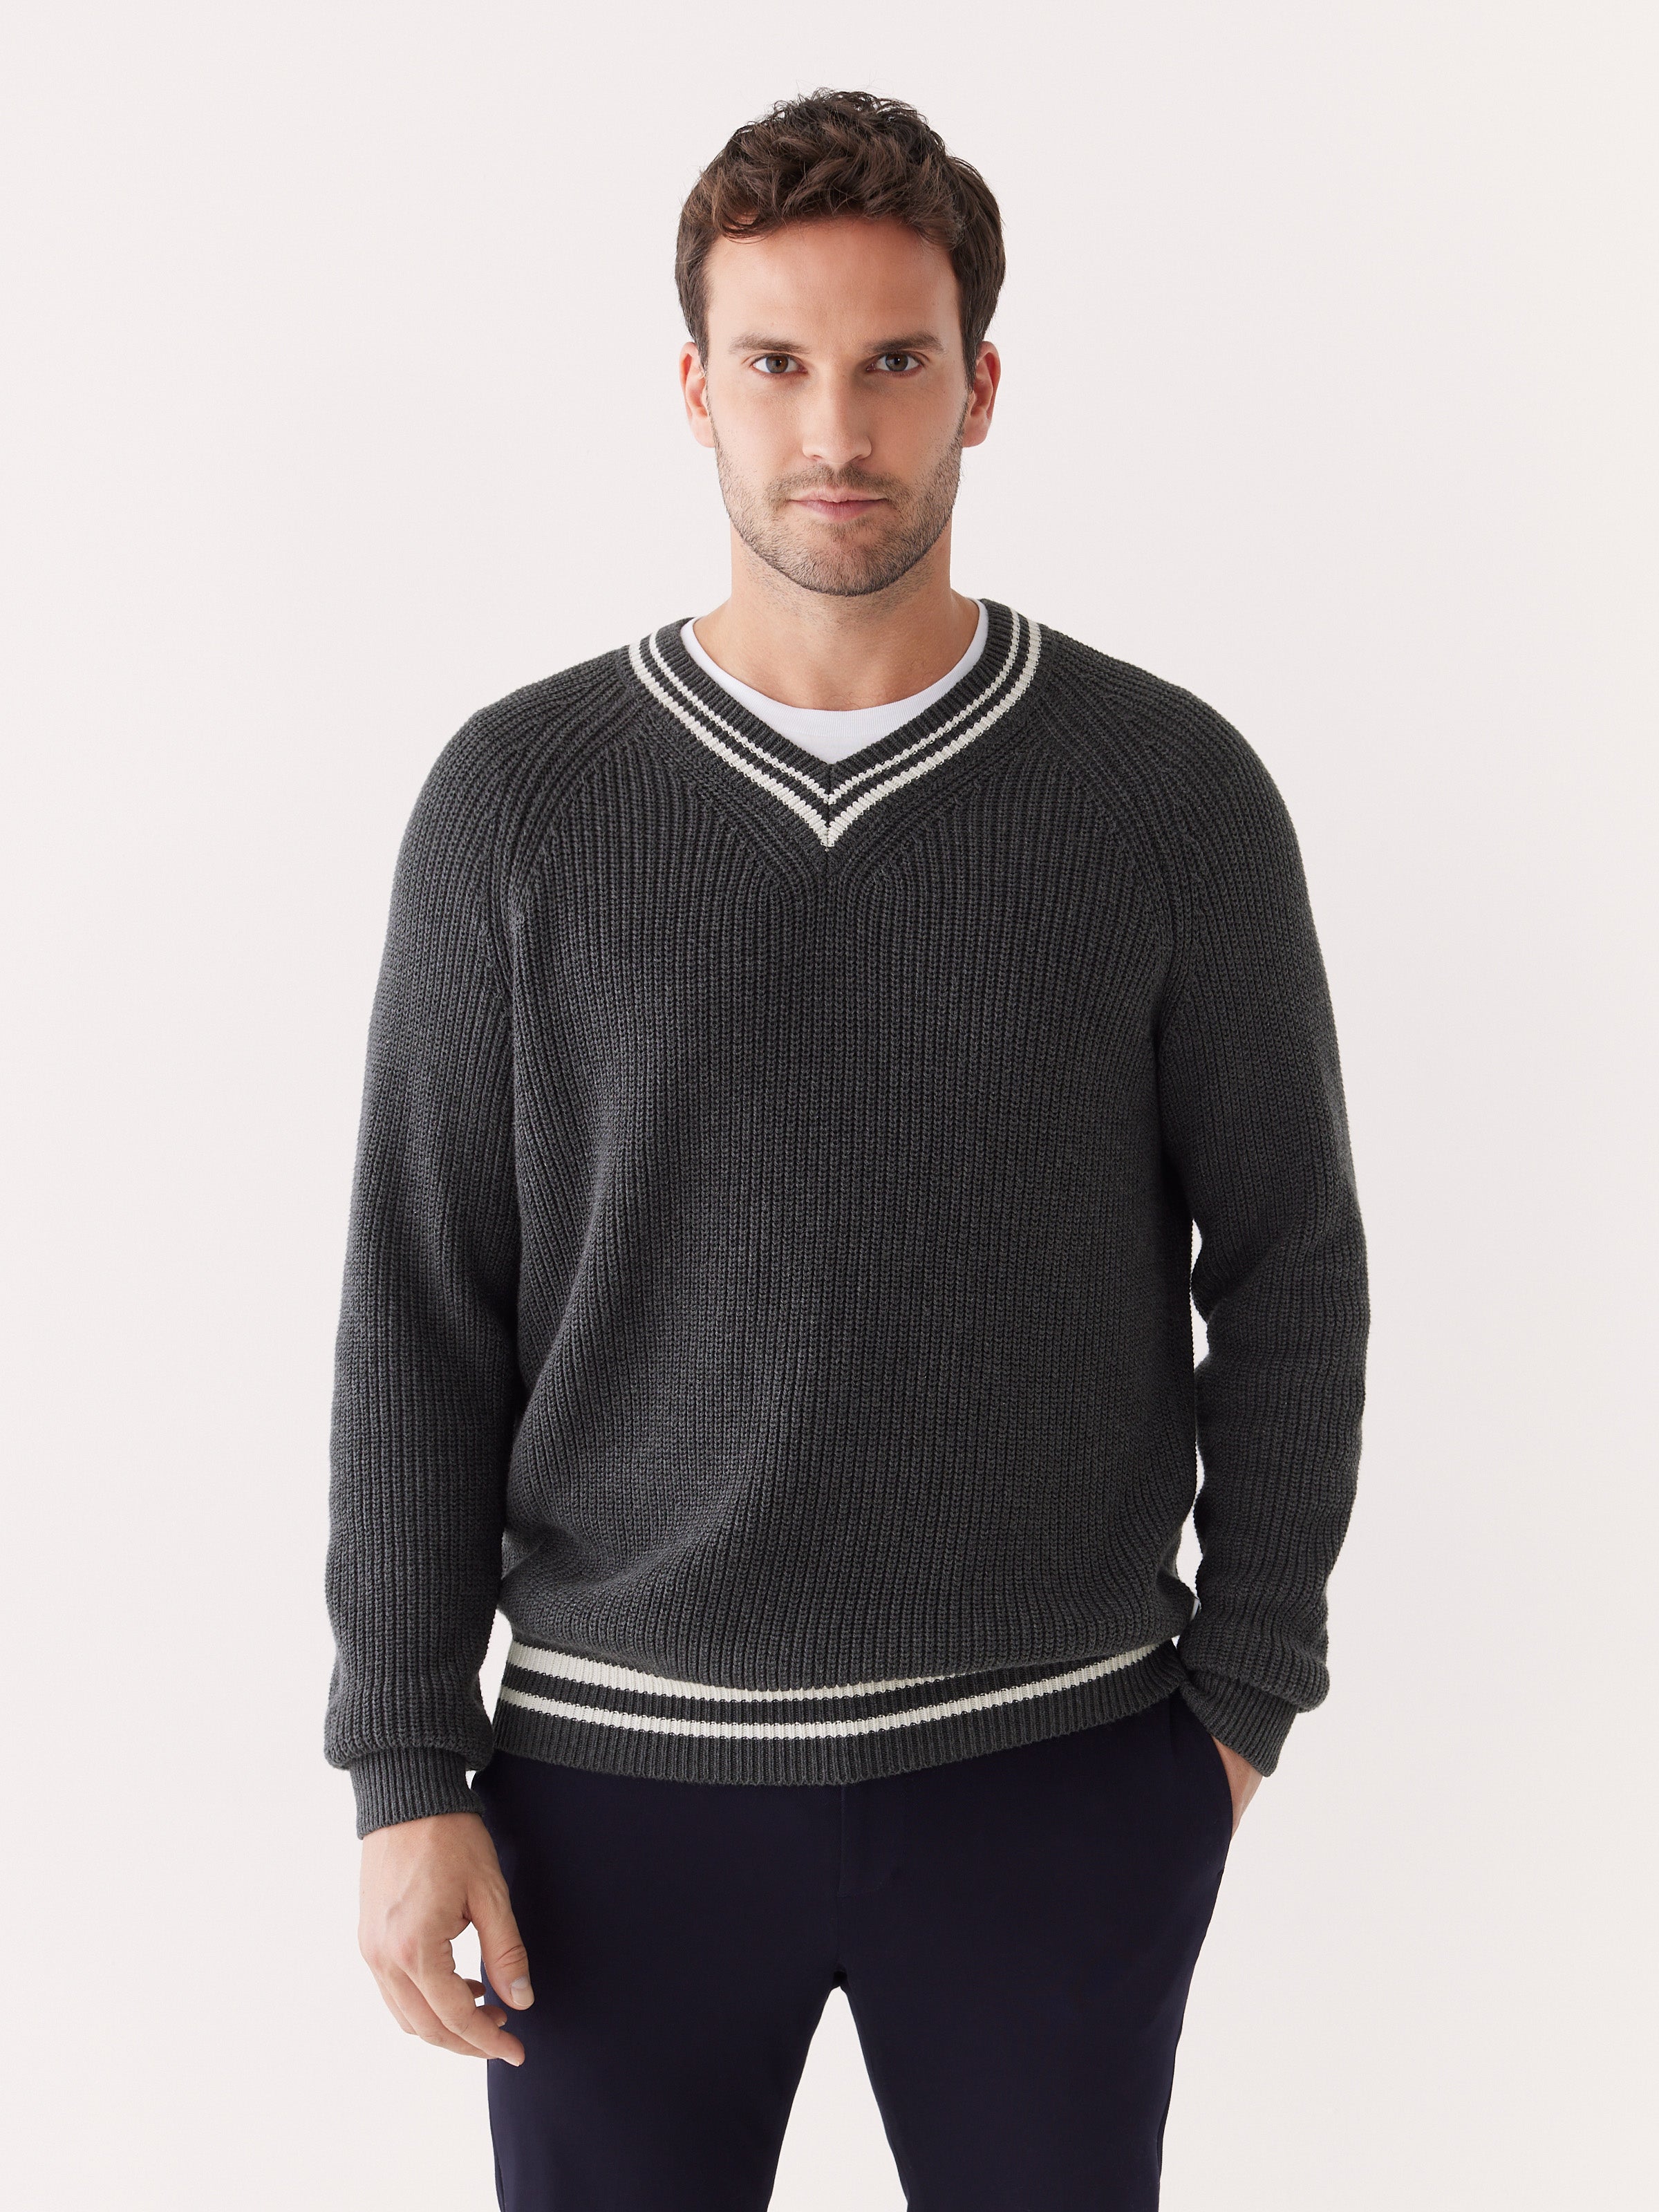 The Ribbed V Neck Sweater in Shadow Black